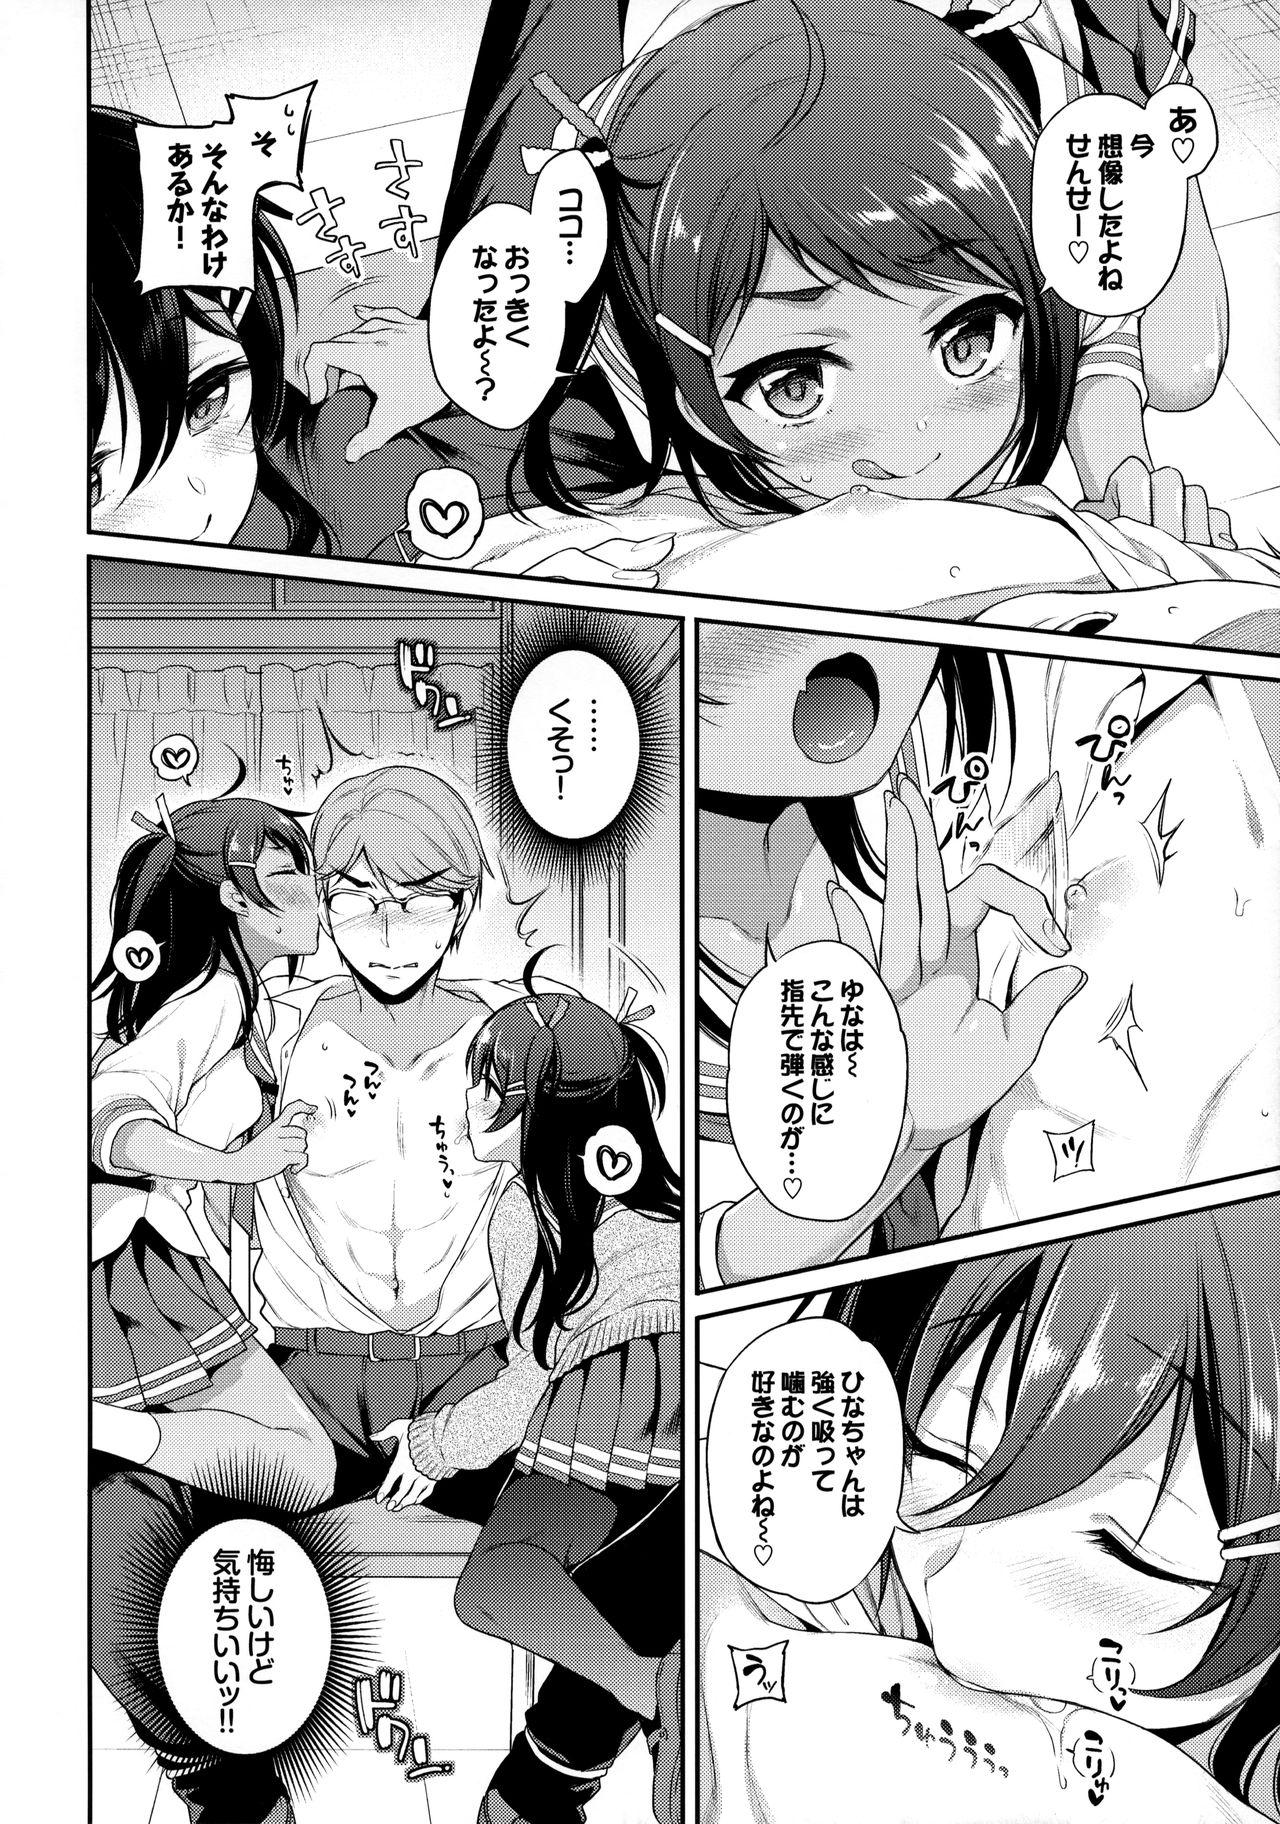 Perfect Tits Monster Student!! 1 Jikanme - Original Blowjobs - Page 7